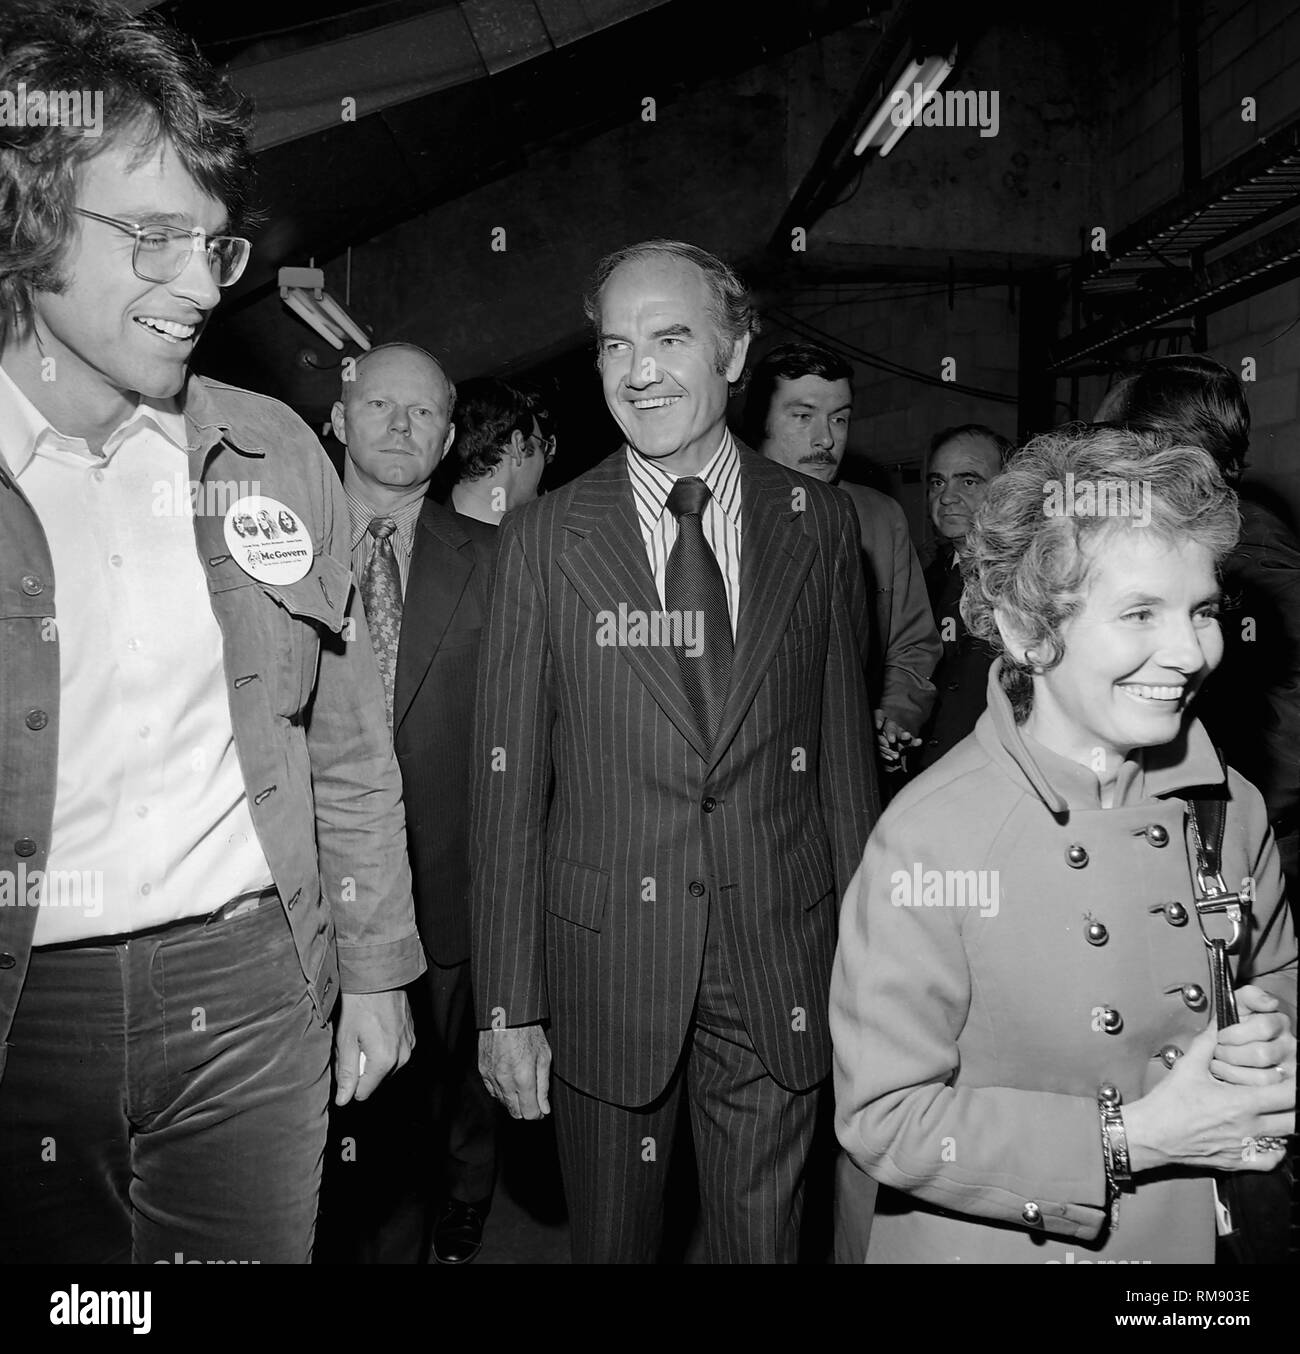 Actor Warren Beatty talks with Presidential candidate George McGovern and his wife Eleanor before a fundraising concert in April 15, 1972 at The Forum in Los Angeles featuring James Taylor, Carole KIng, Barbra Streisand and Quincy Jones. Stock Photo